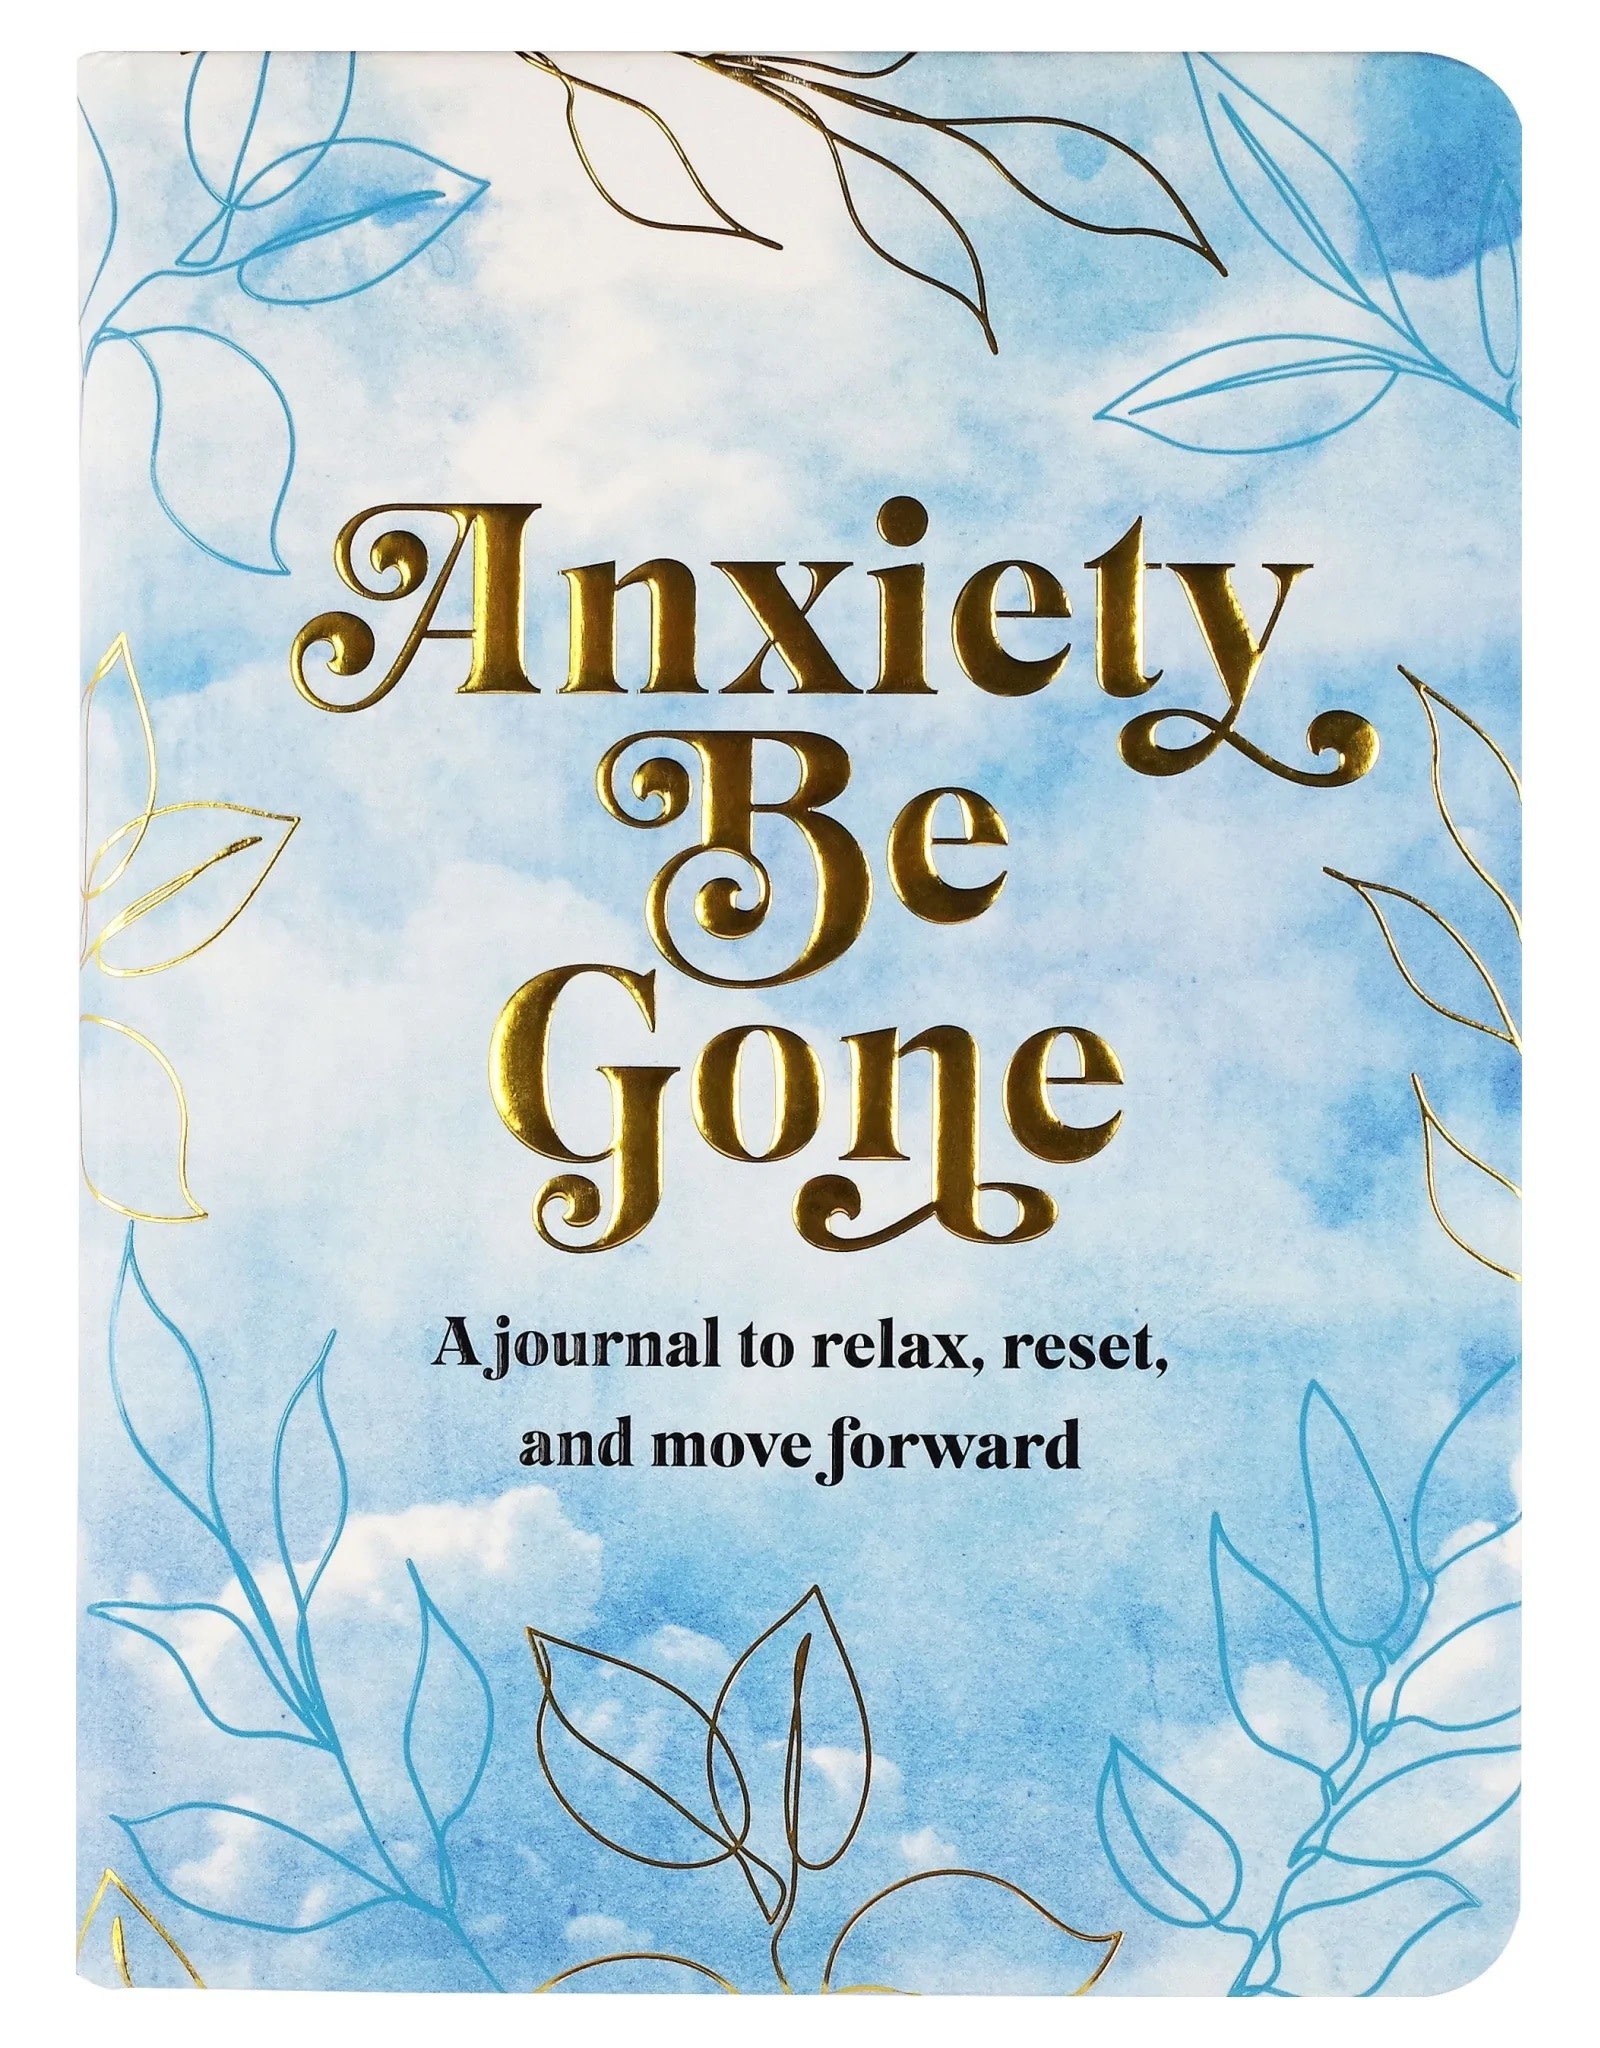 Peter Pauper Press ANXIETY BE GONE- A JOURNAL TO RELAX, REST, AND MOVE FORWARD